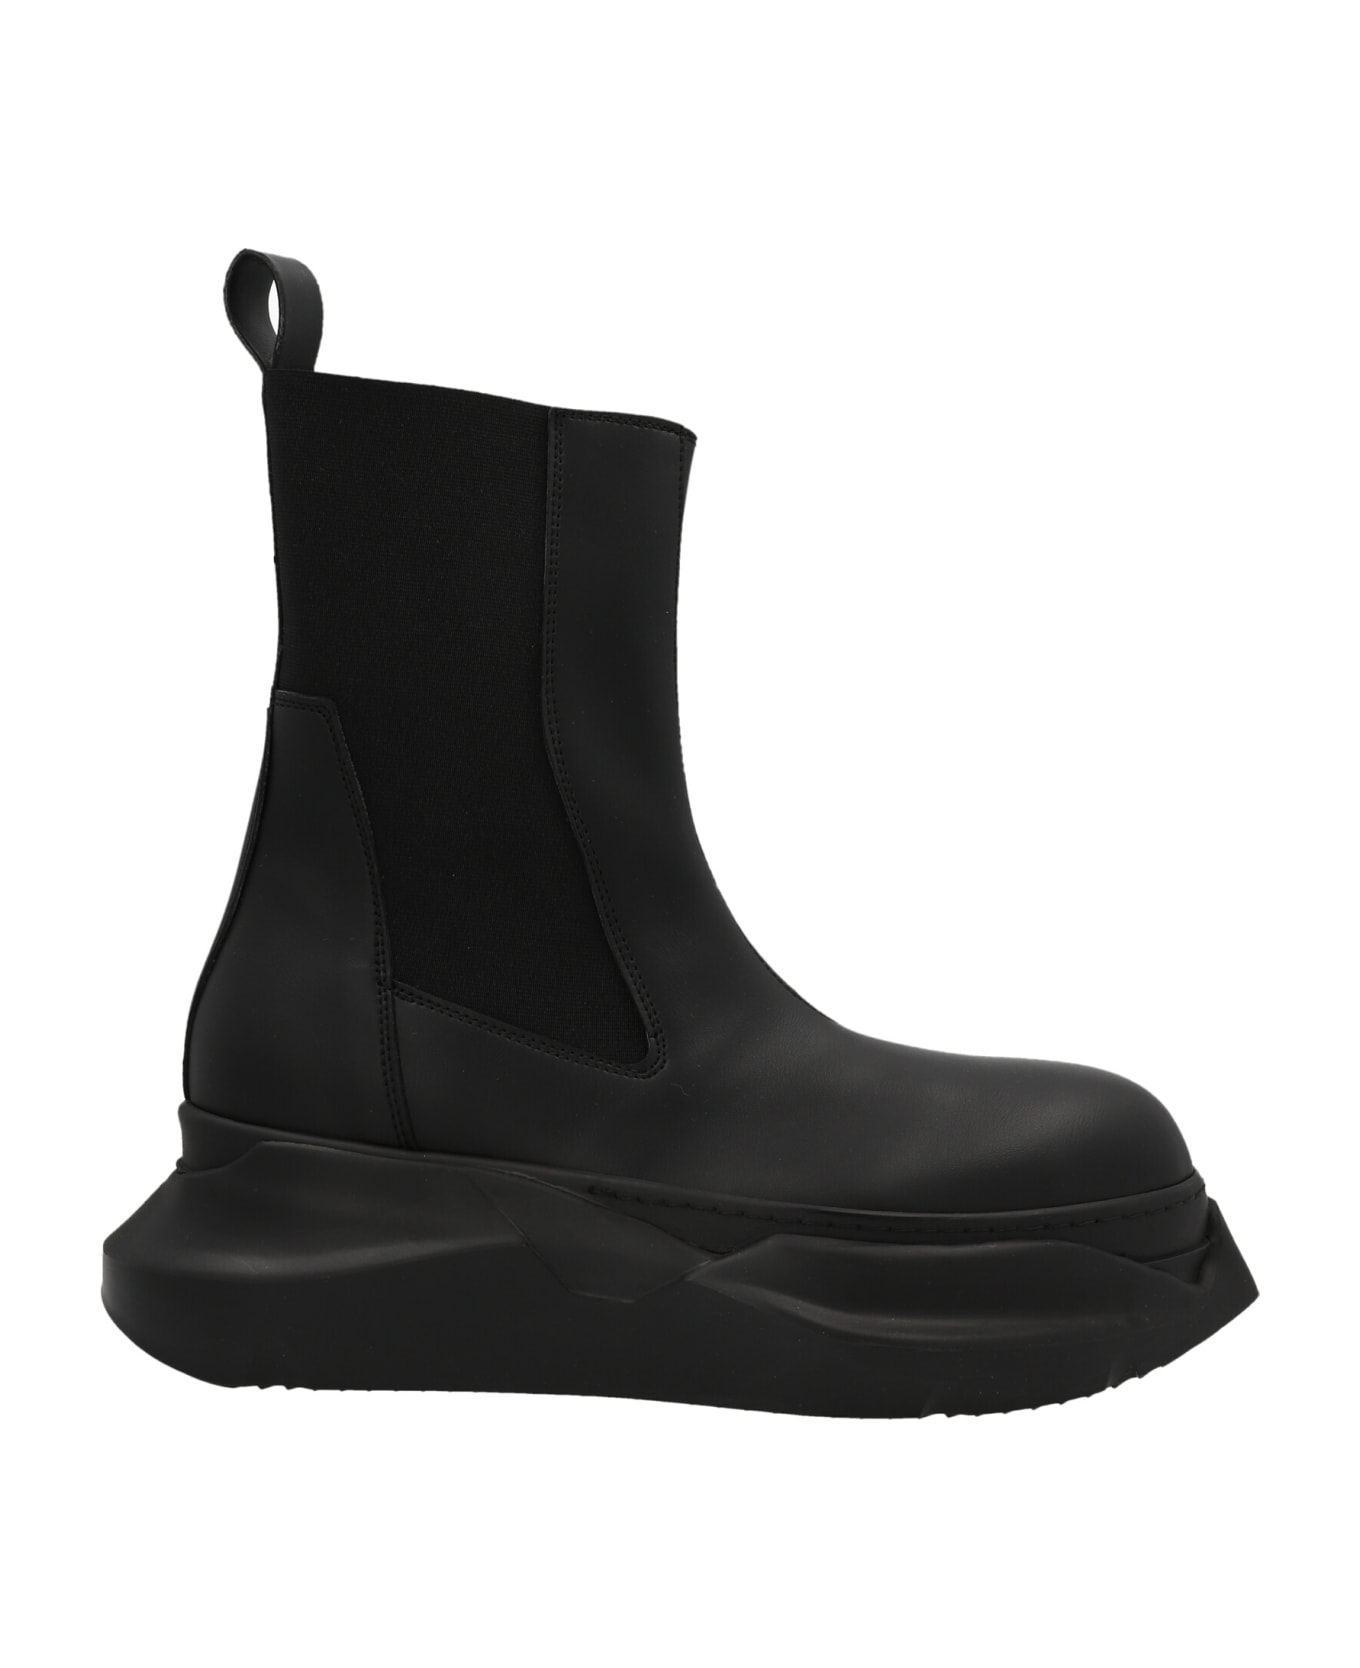 DRKSHDW 'beatle Abstract' Boots - Black  